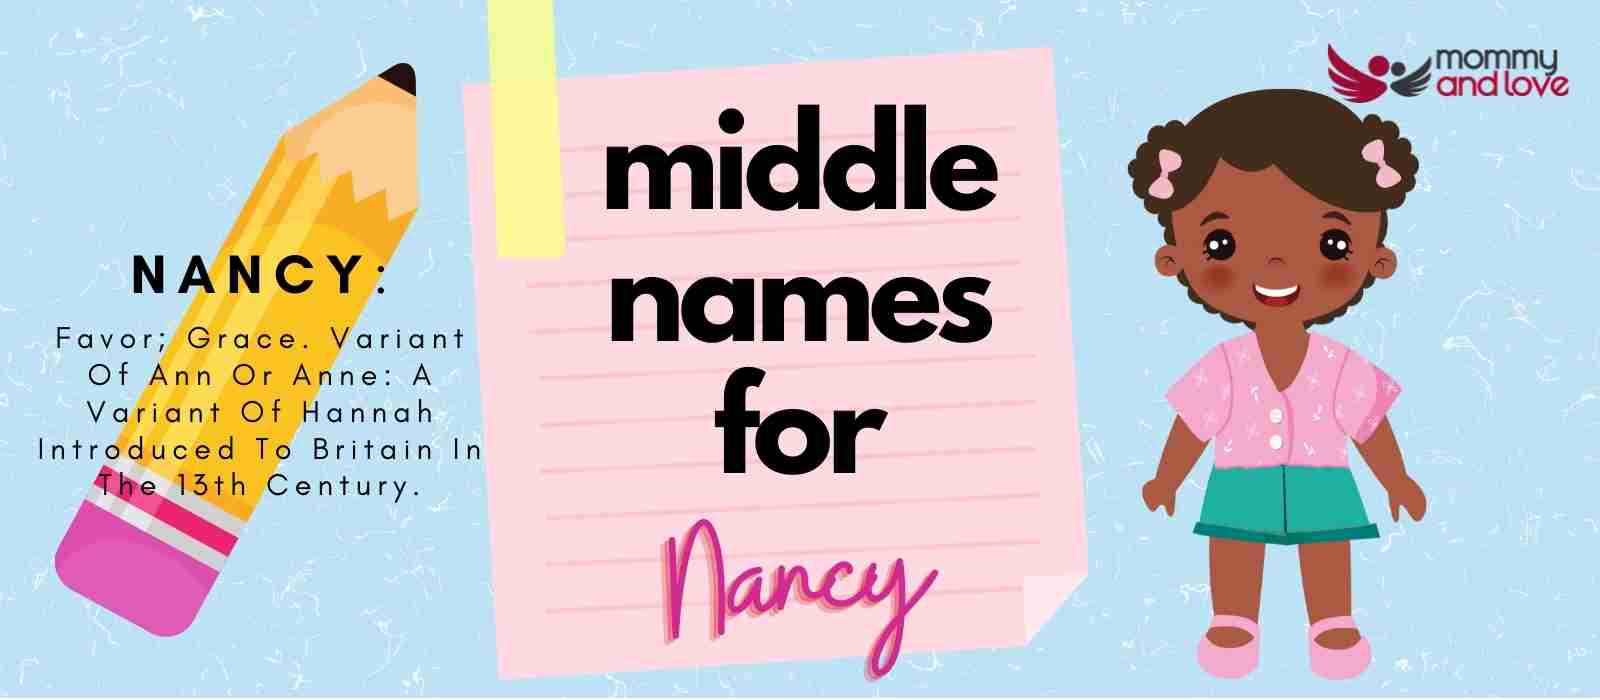 Middle Names for Nancy